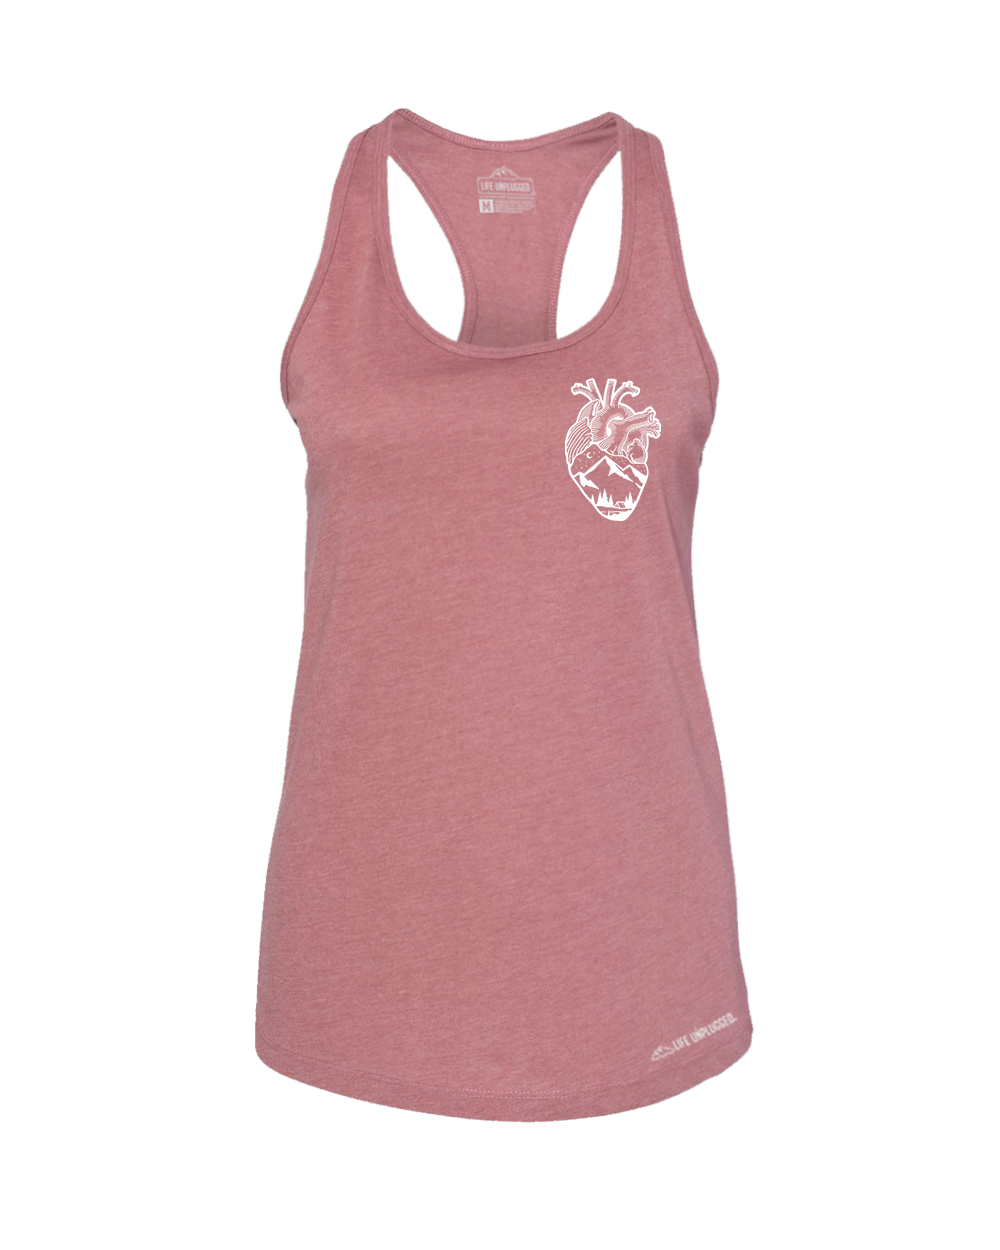 Anatomical Heart (Left Chest) Premium Women's Relaxed Fit Racerback Tank Top - Life Unplugged